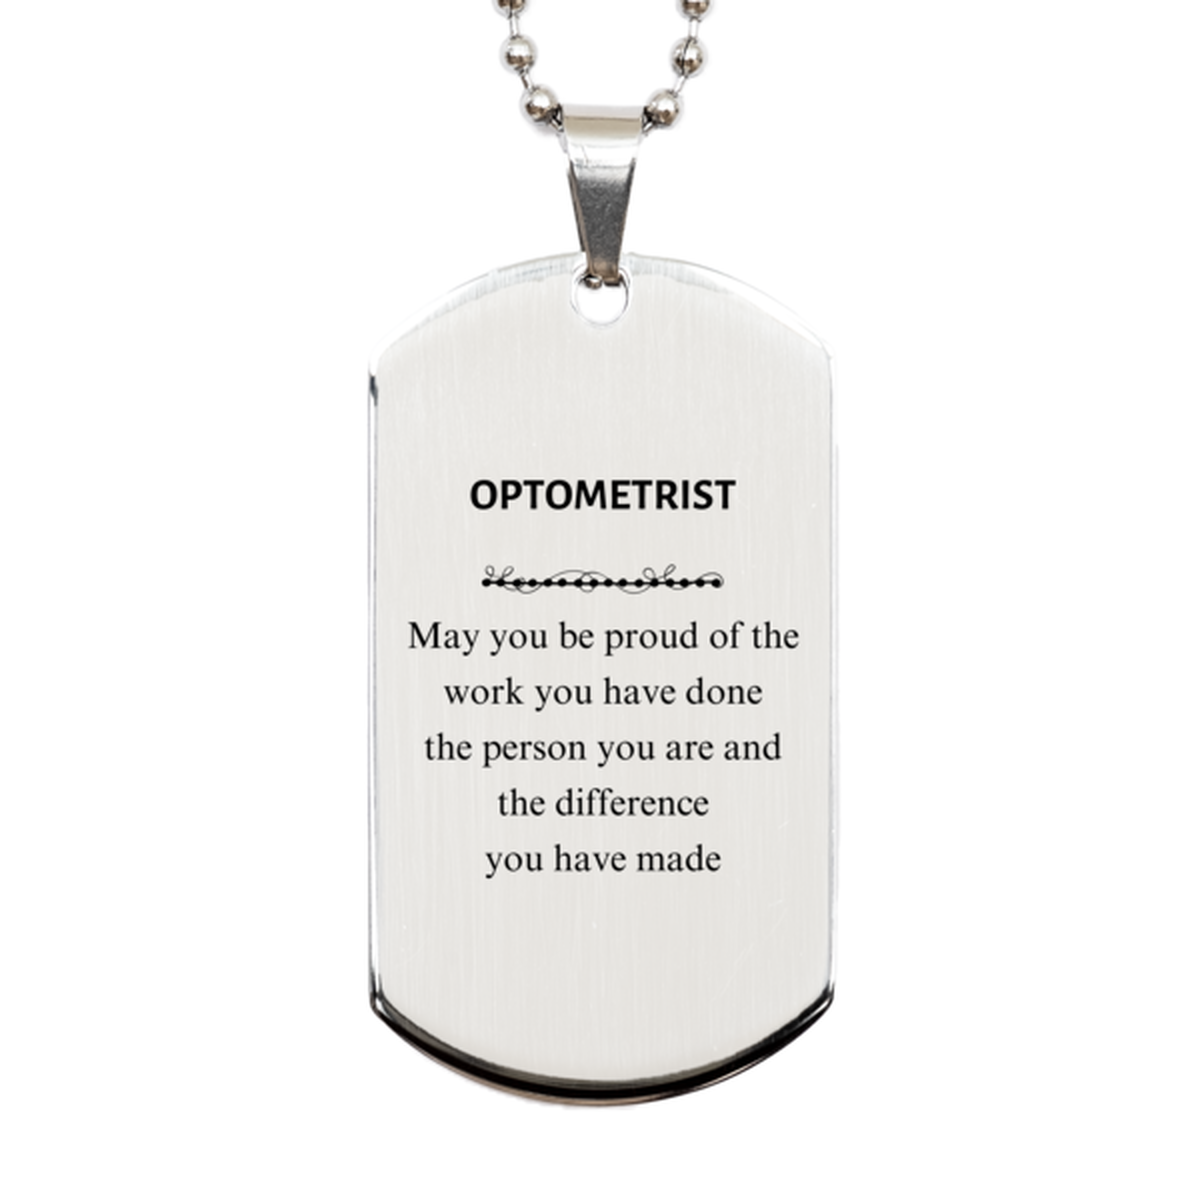 Optometrist May you be proud of the work you have done, Retirement Optometrist Silver Dog Tag for Colleague Appreciation Gifts Amazing for Optometrist